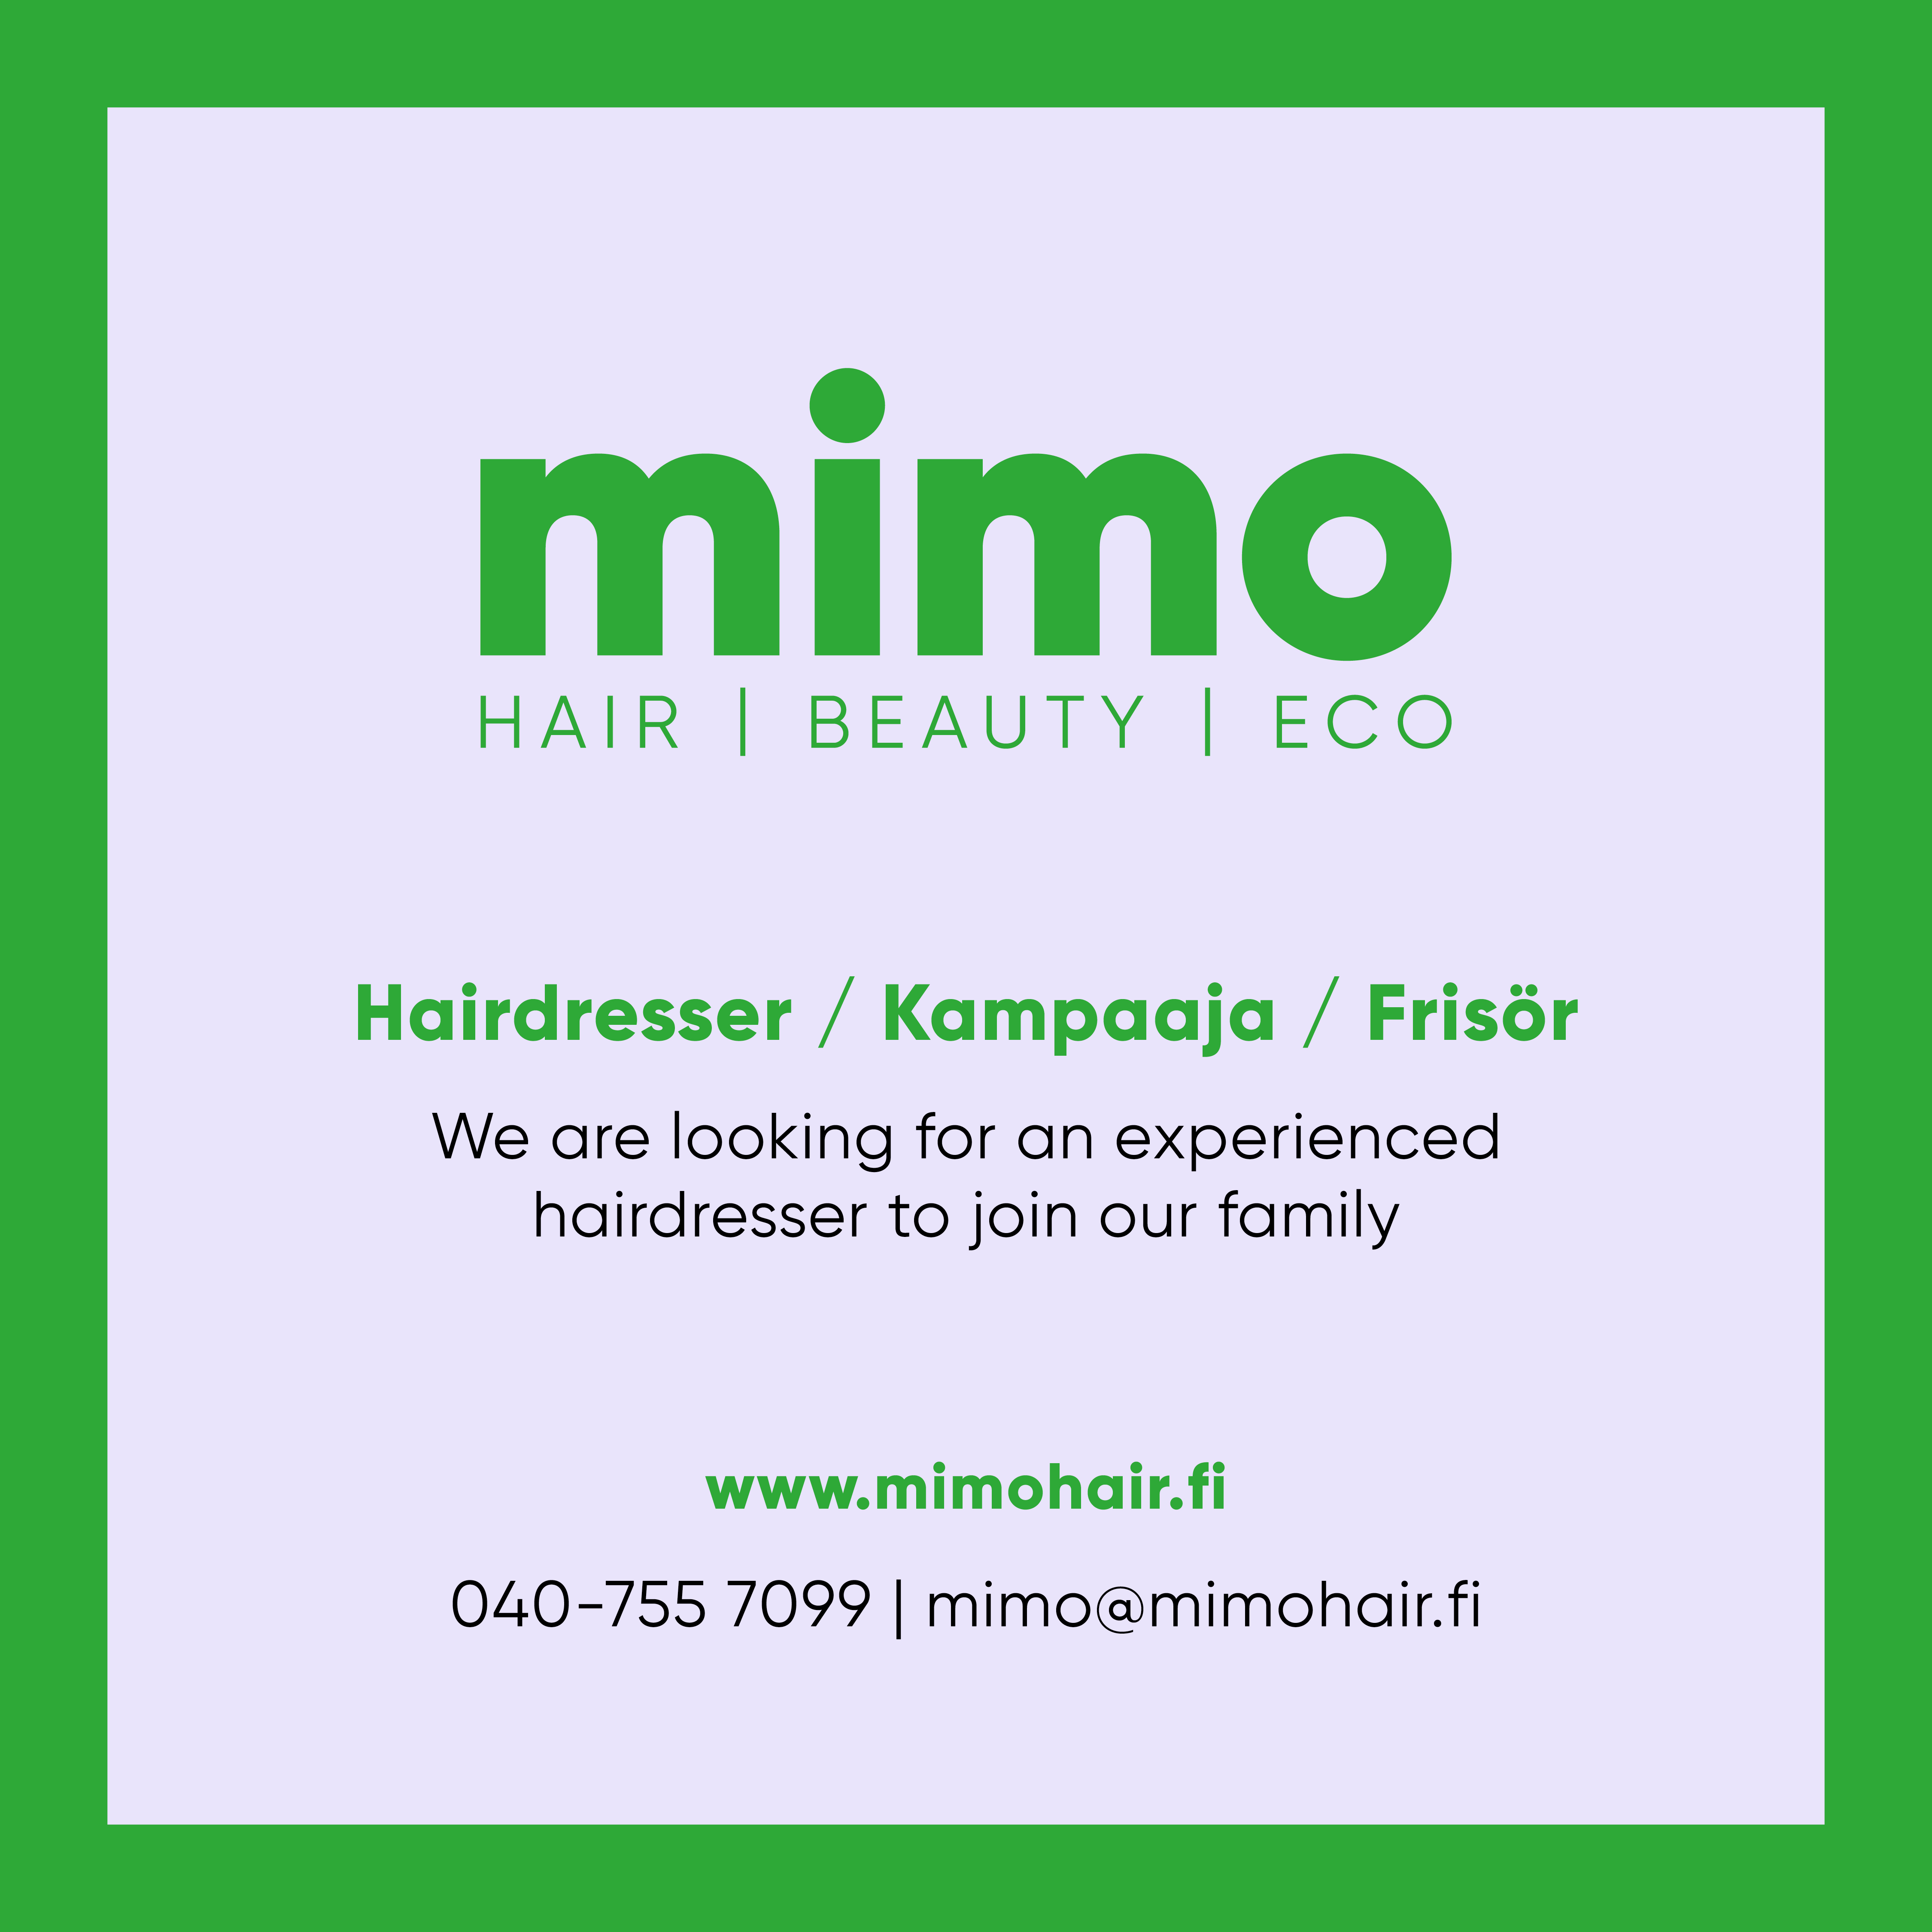 We are looking for an experienced hairdresser to join our family, contact us!